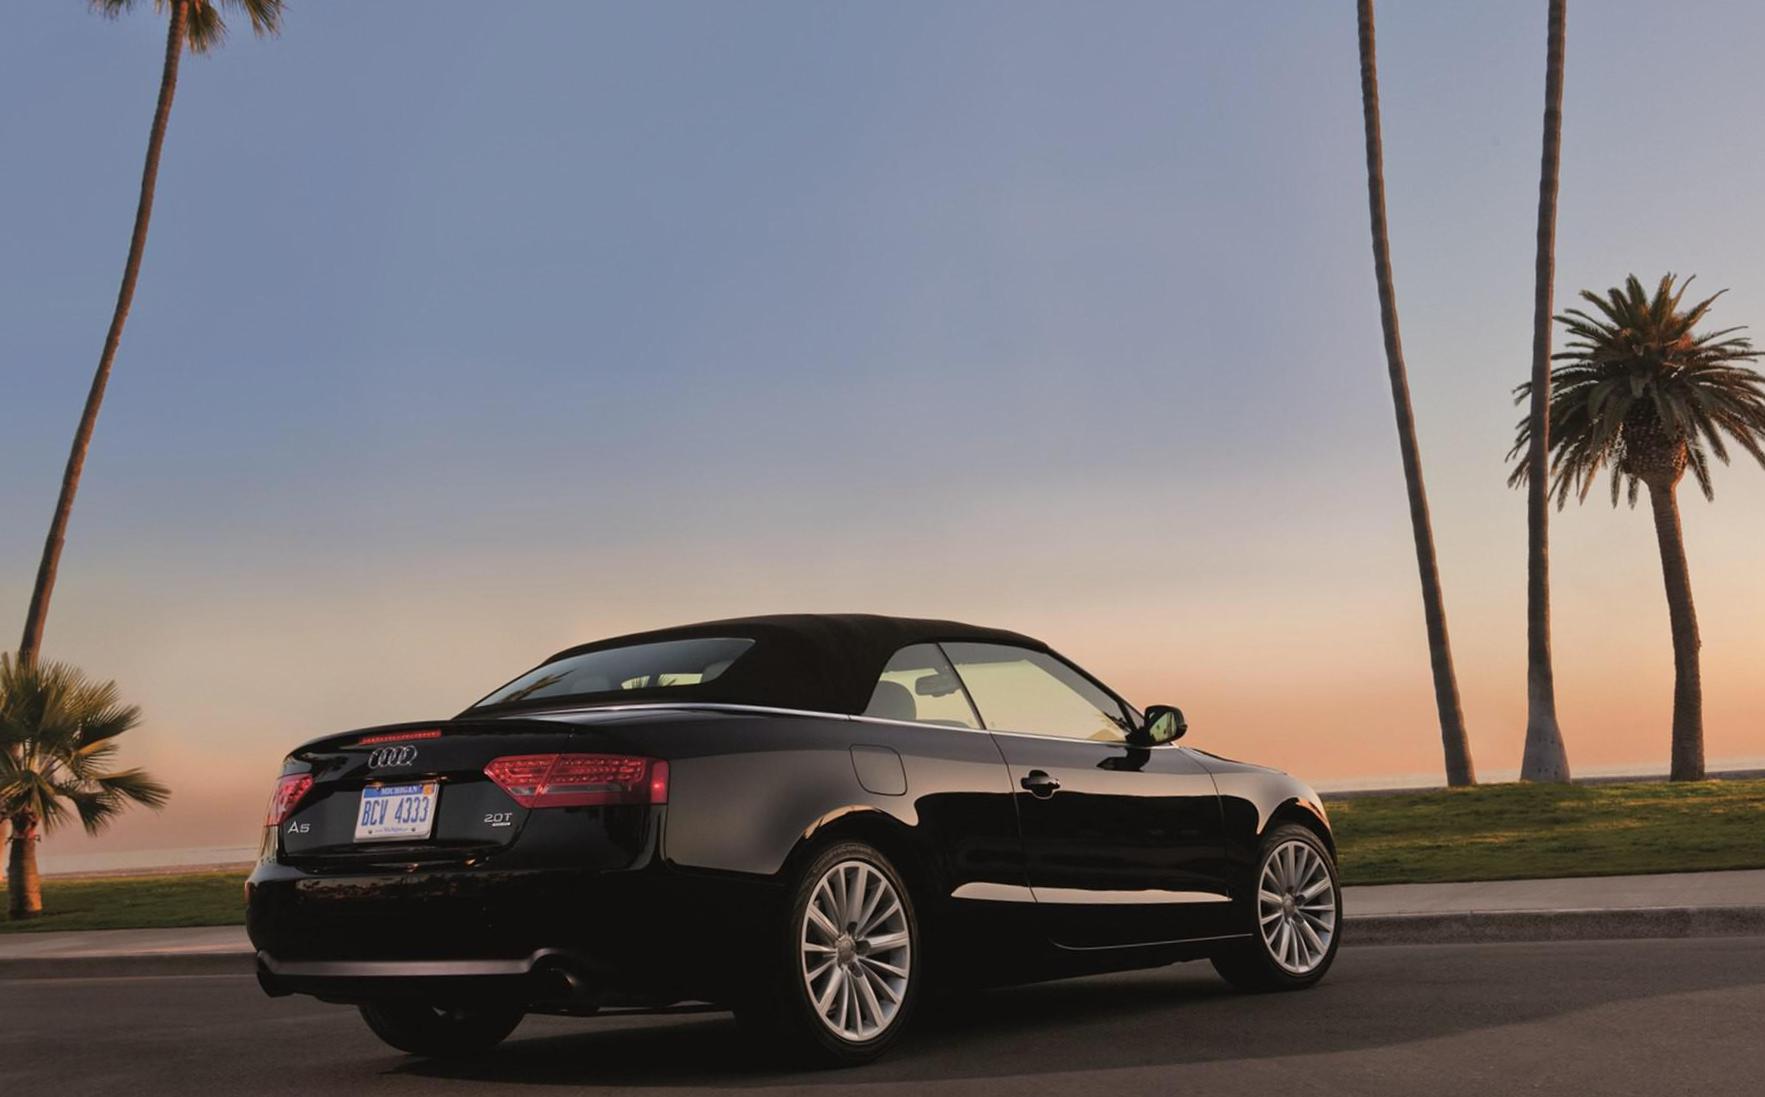 A5 Cabriolet Audi approved 2008